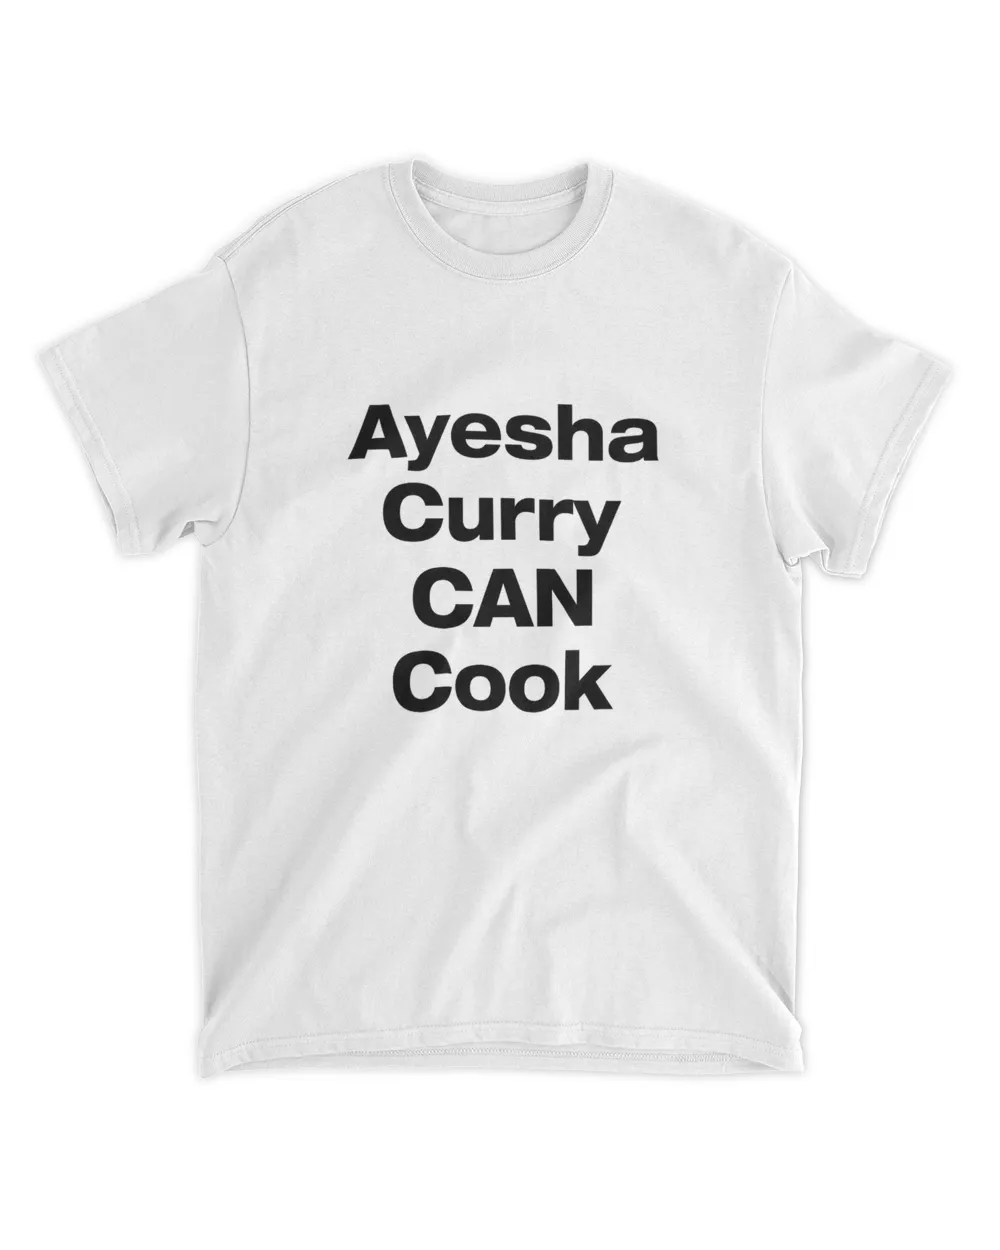 Ayesha Curry Can Cook Shirts